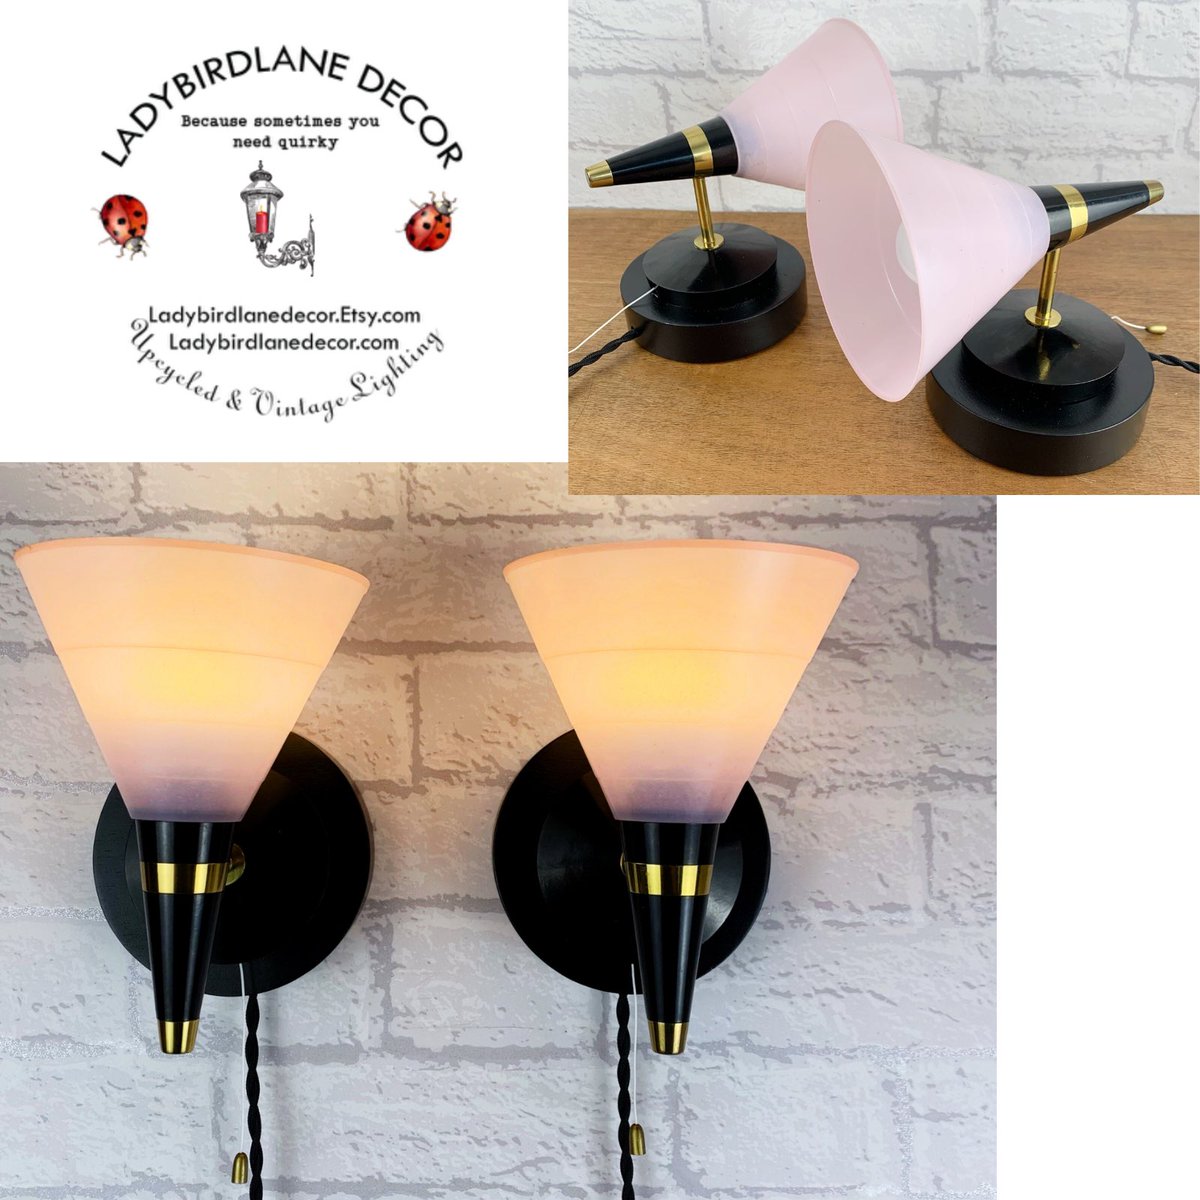 #MHHSBD 𝗙𝗮𝗻𝗰𝘆 𝗮 𝗯𝗶𝘁 𝗼𝗳 𝗠𝗶𝗱 𝗖𝗲𝗻𝘁𝘂𝗿𝘆 💡 A rare matched pair of gorgeous Mid Century Bakelite wall lights with bold black & gold sconces and the softest of soft pink Bakelite shades. Complete with hanging brackets & 2m of cable, or you can hardwire them.